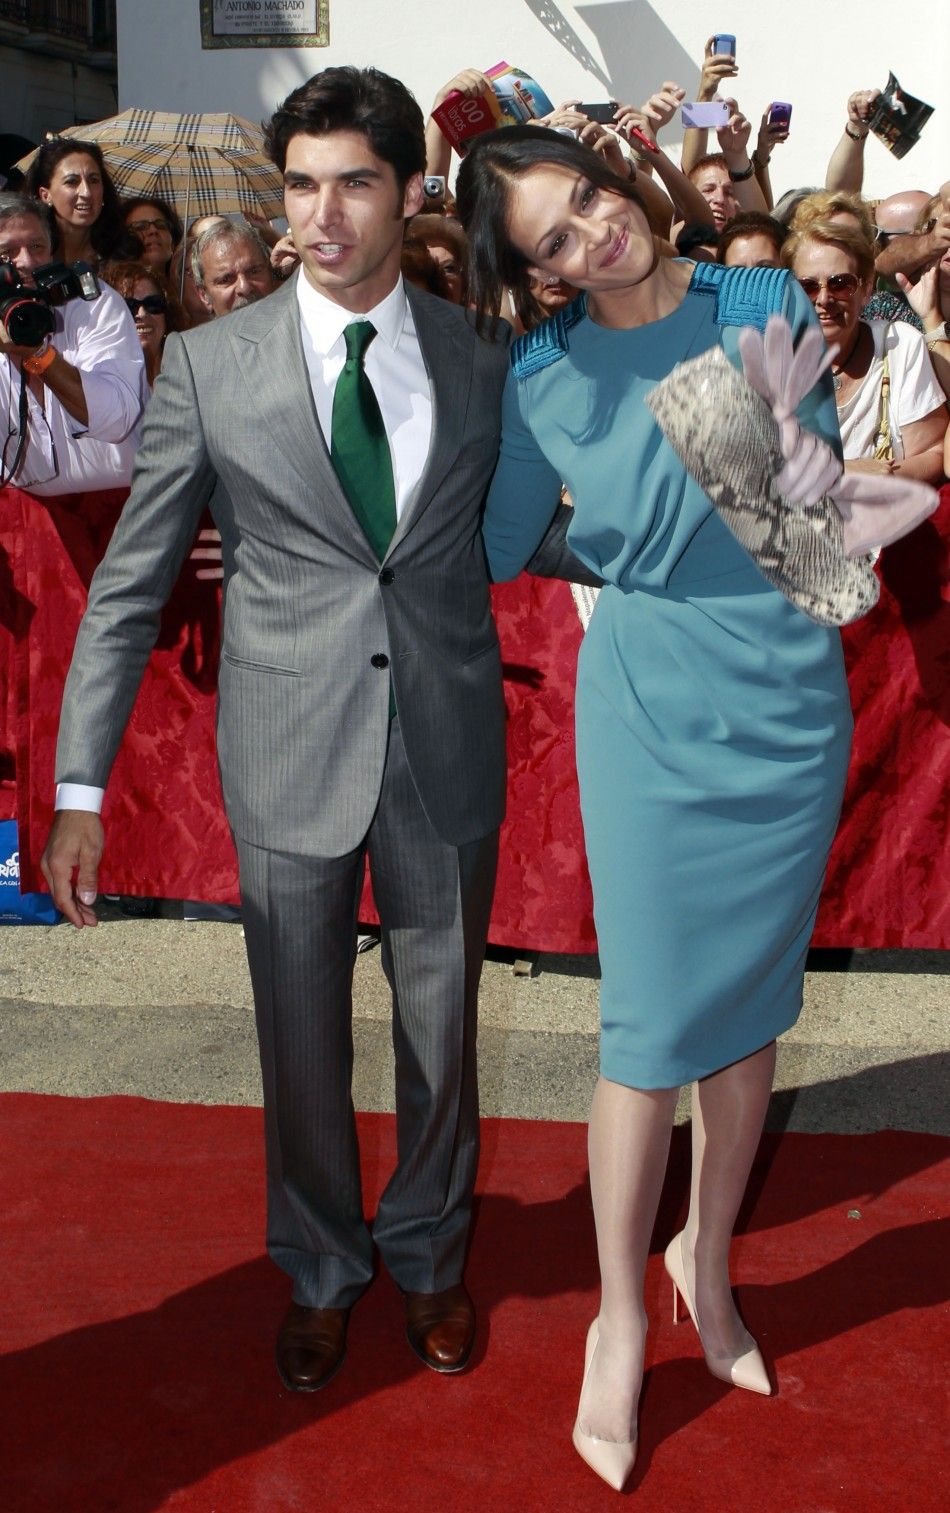 Spanish bullfighter Cayetano Rivera L and his girlfriend Eva Gonzalez arrive at Las Duenas Palace to attend the wedding of Spains Duchess of Alba Cayetana Fitz-James Stuart y Silva and Alfonso Diez in Seville